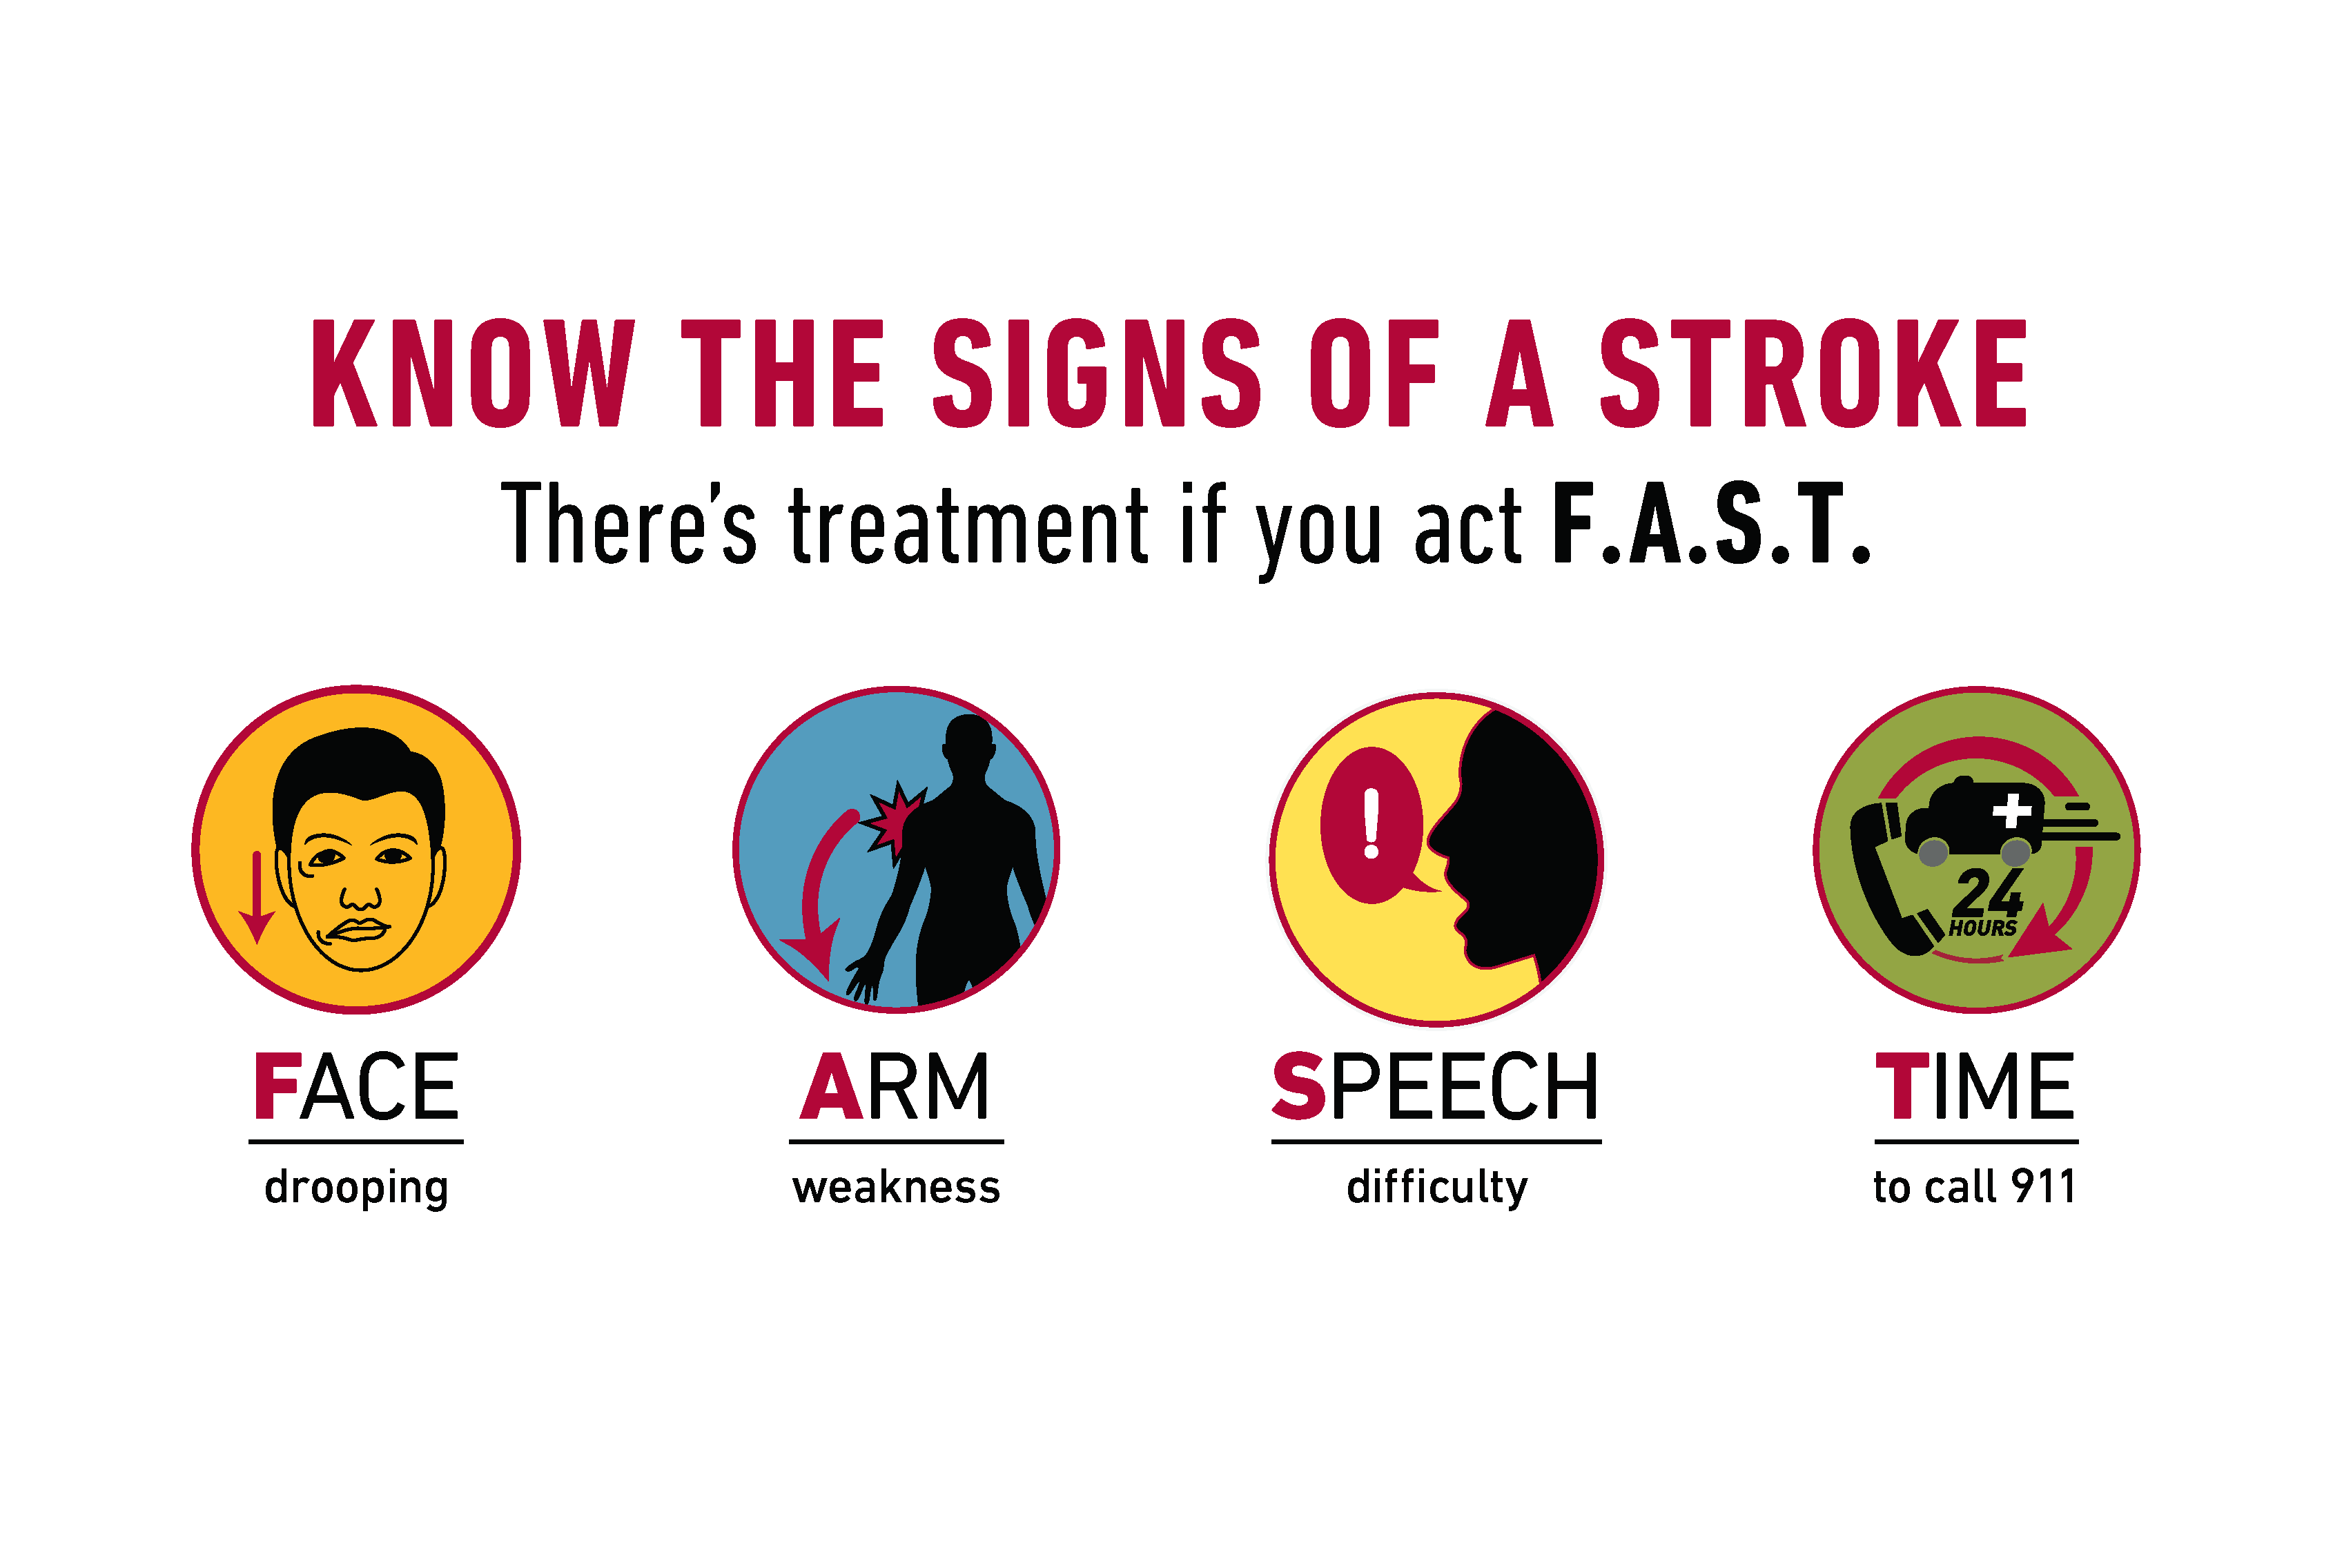 Stroke: Know the Signs F.A.S.T.